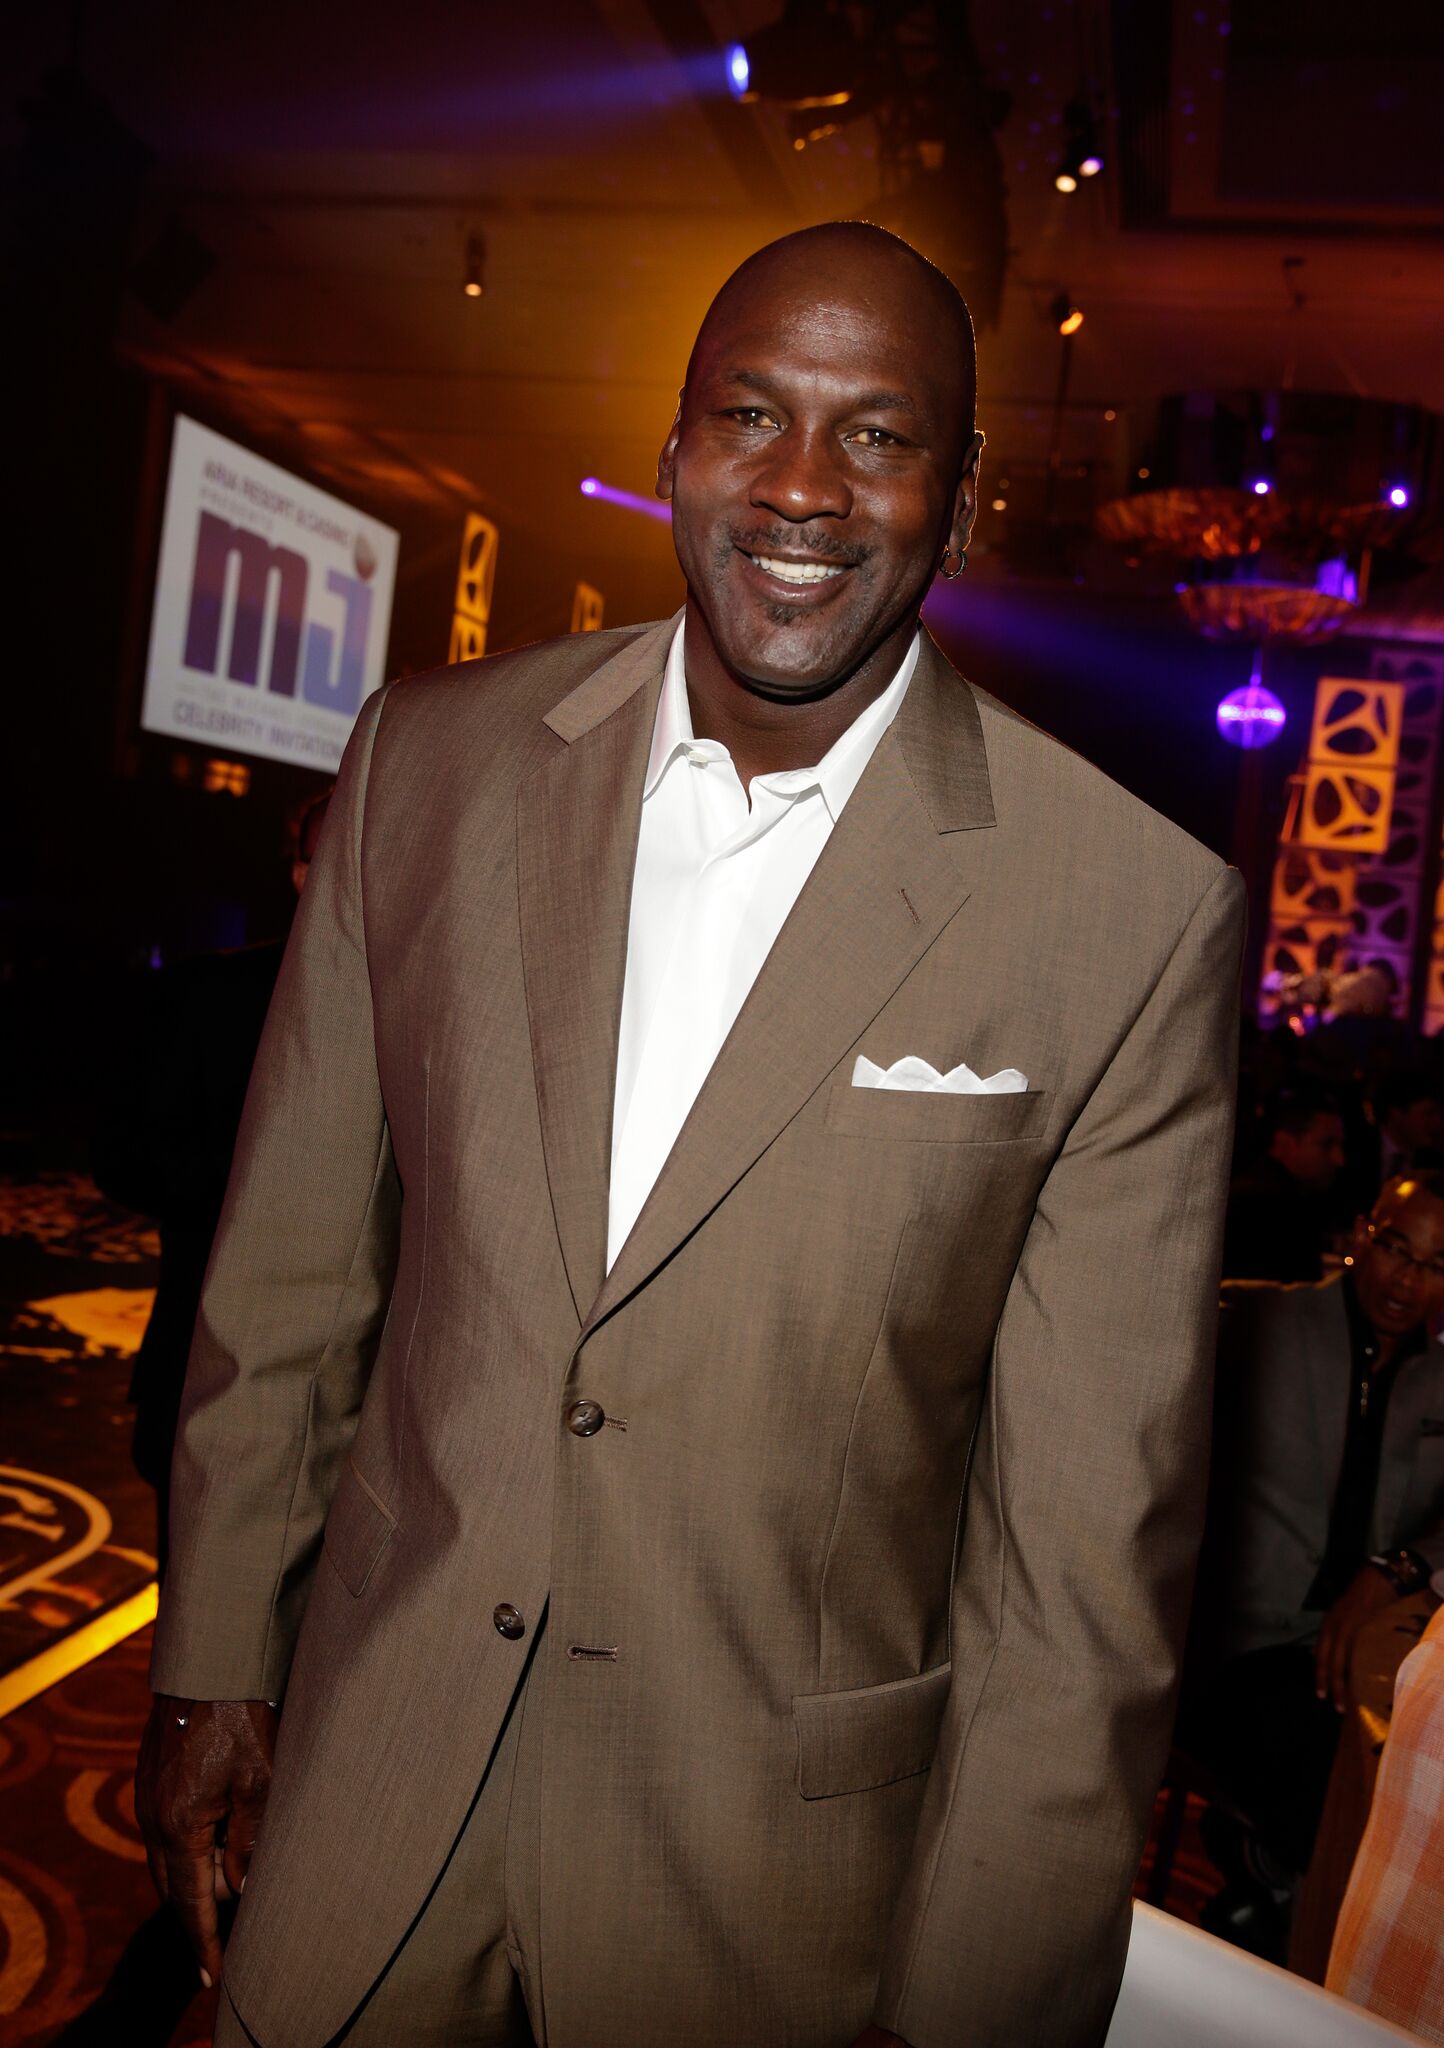 NBA legend and tournament host Michael Jordan attends the 13th annual Michael Jordan Celebrity Invitational gala at the ARIA Resort & Casino at CityCenter on April 4, 2014 | Photo: Getty Images